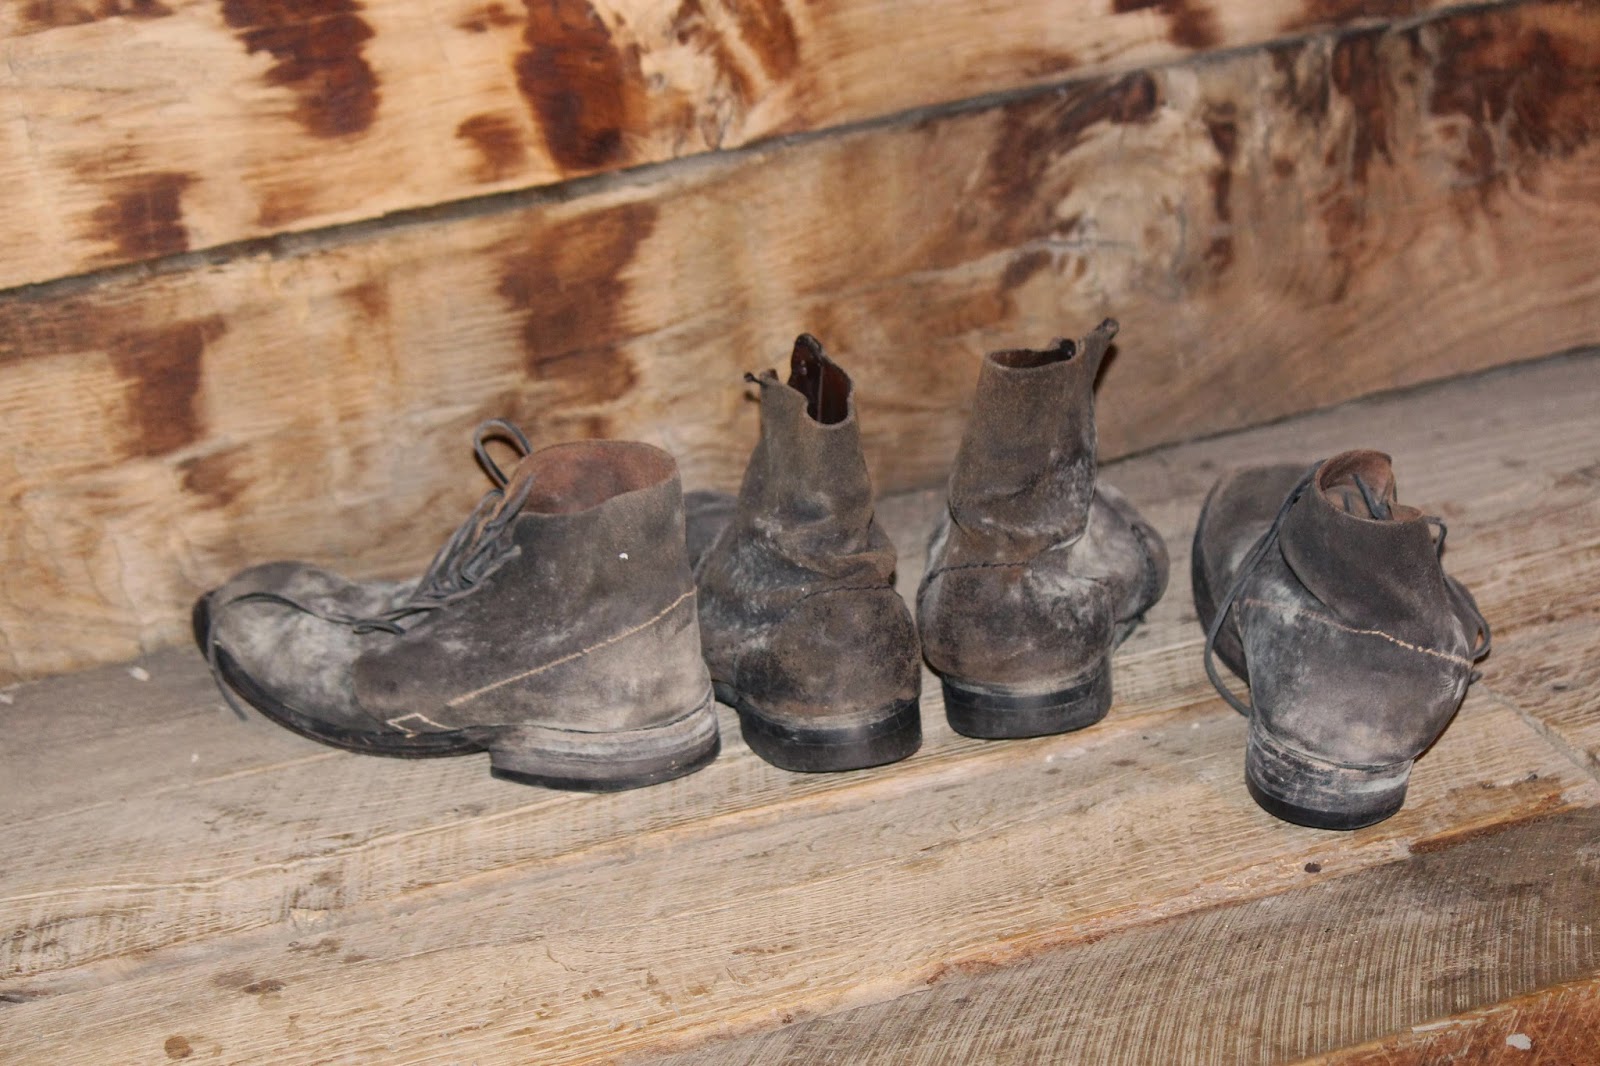 Remove your shoes upon entering your home to reduce exposure to pollutants.